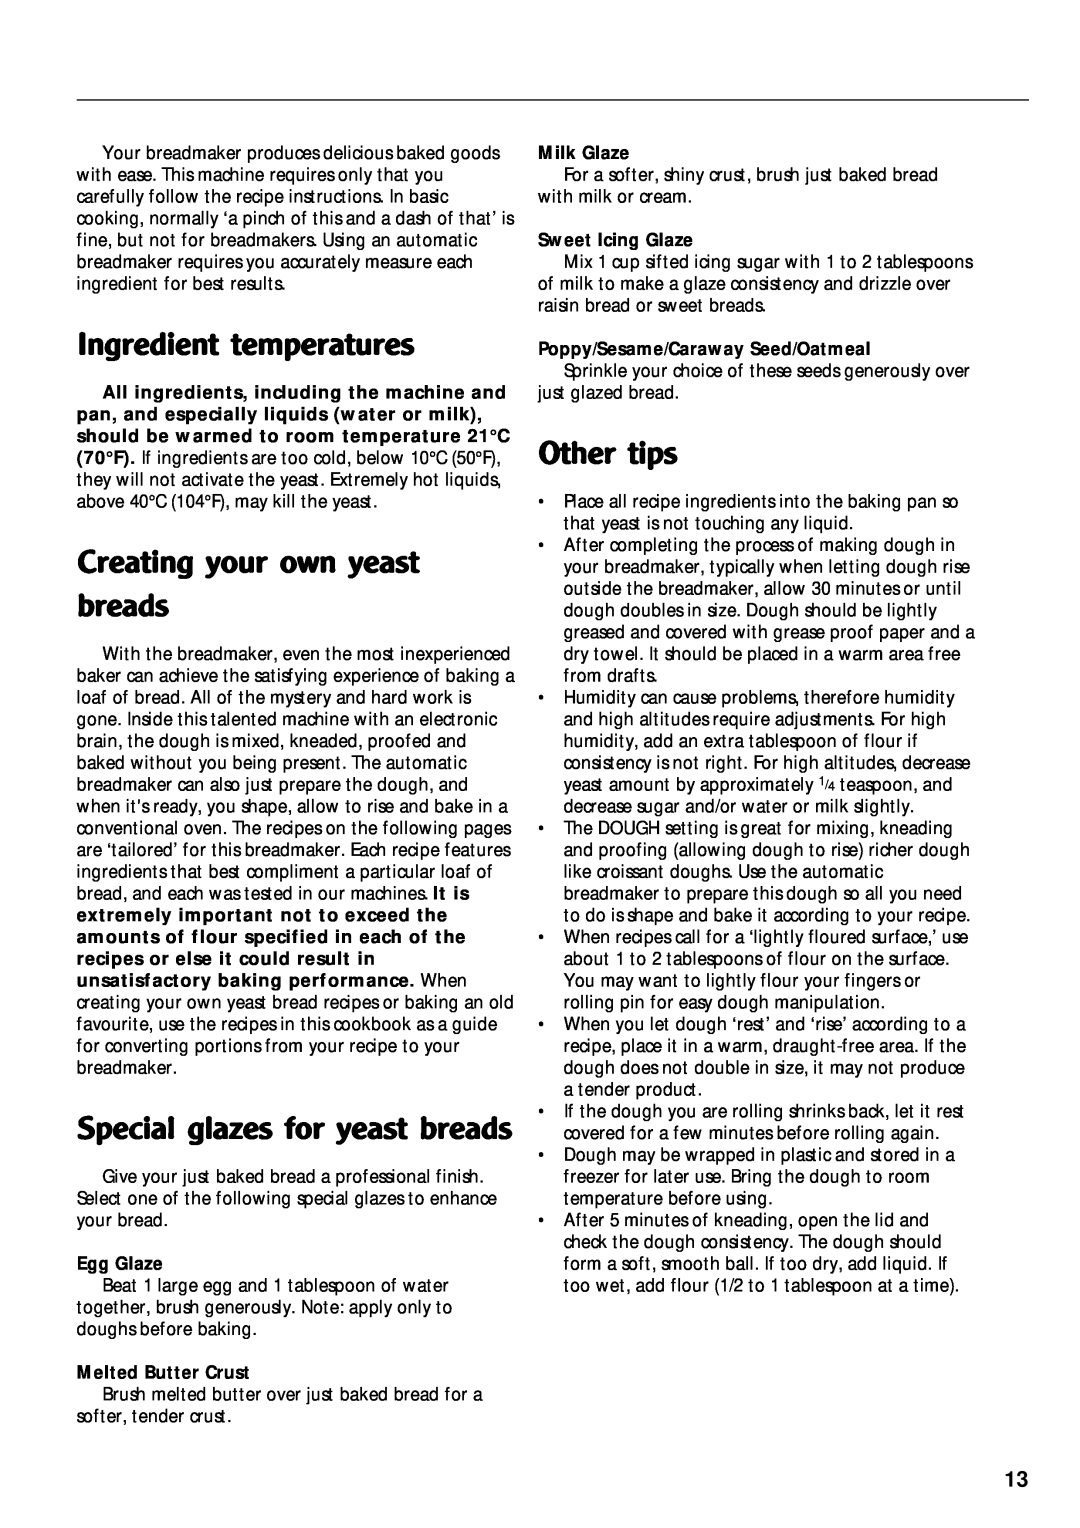 Morphy Richards Bread Maker manual Ingredient temperatures, Creating your own yeast breads, Special glazes for yeast breads 